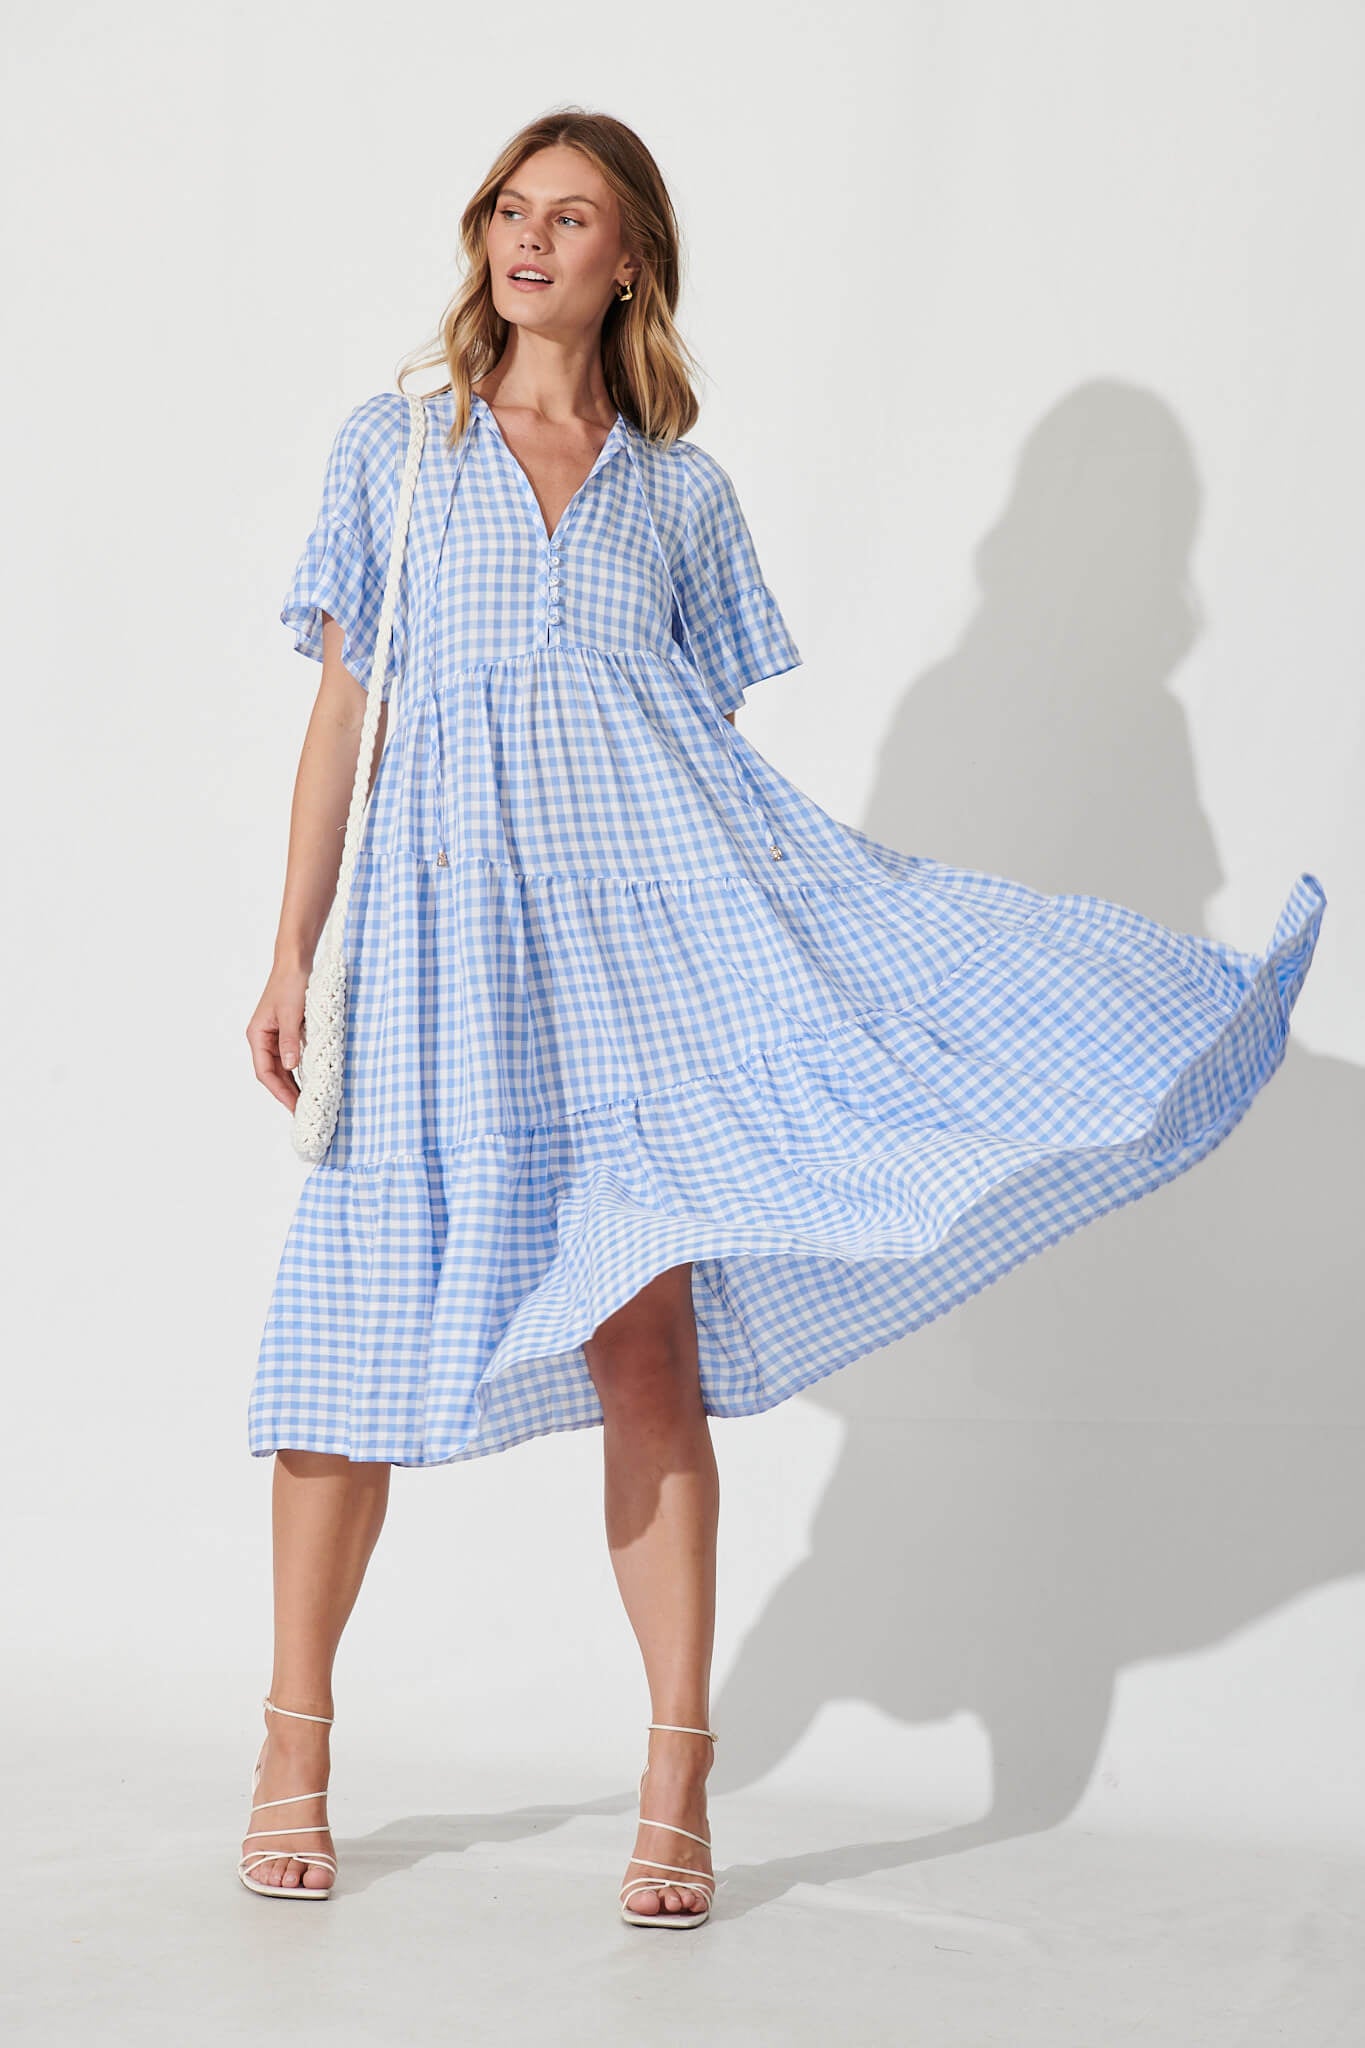 Charliese Midi Dress In Blue And White Gingham Cotton Blend - full length